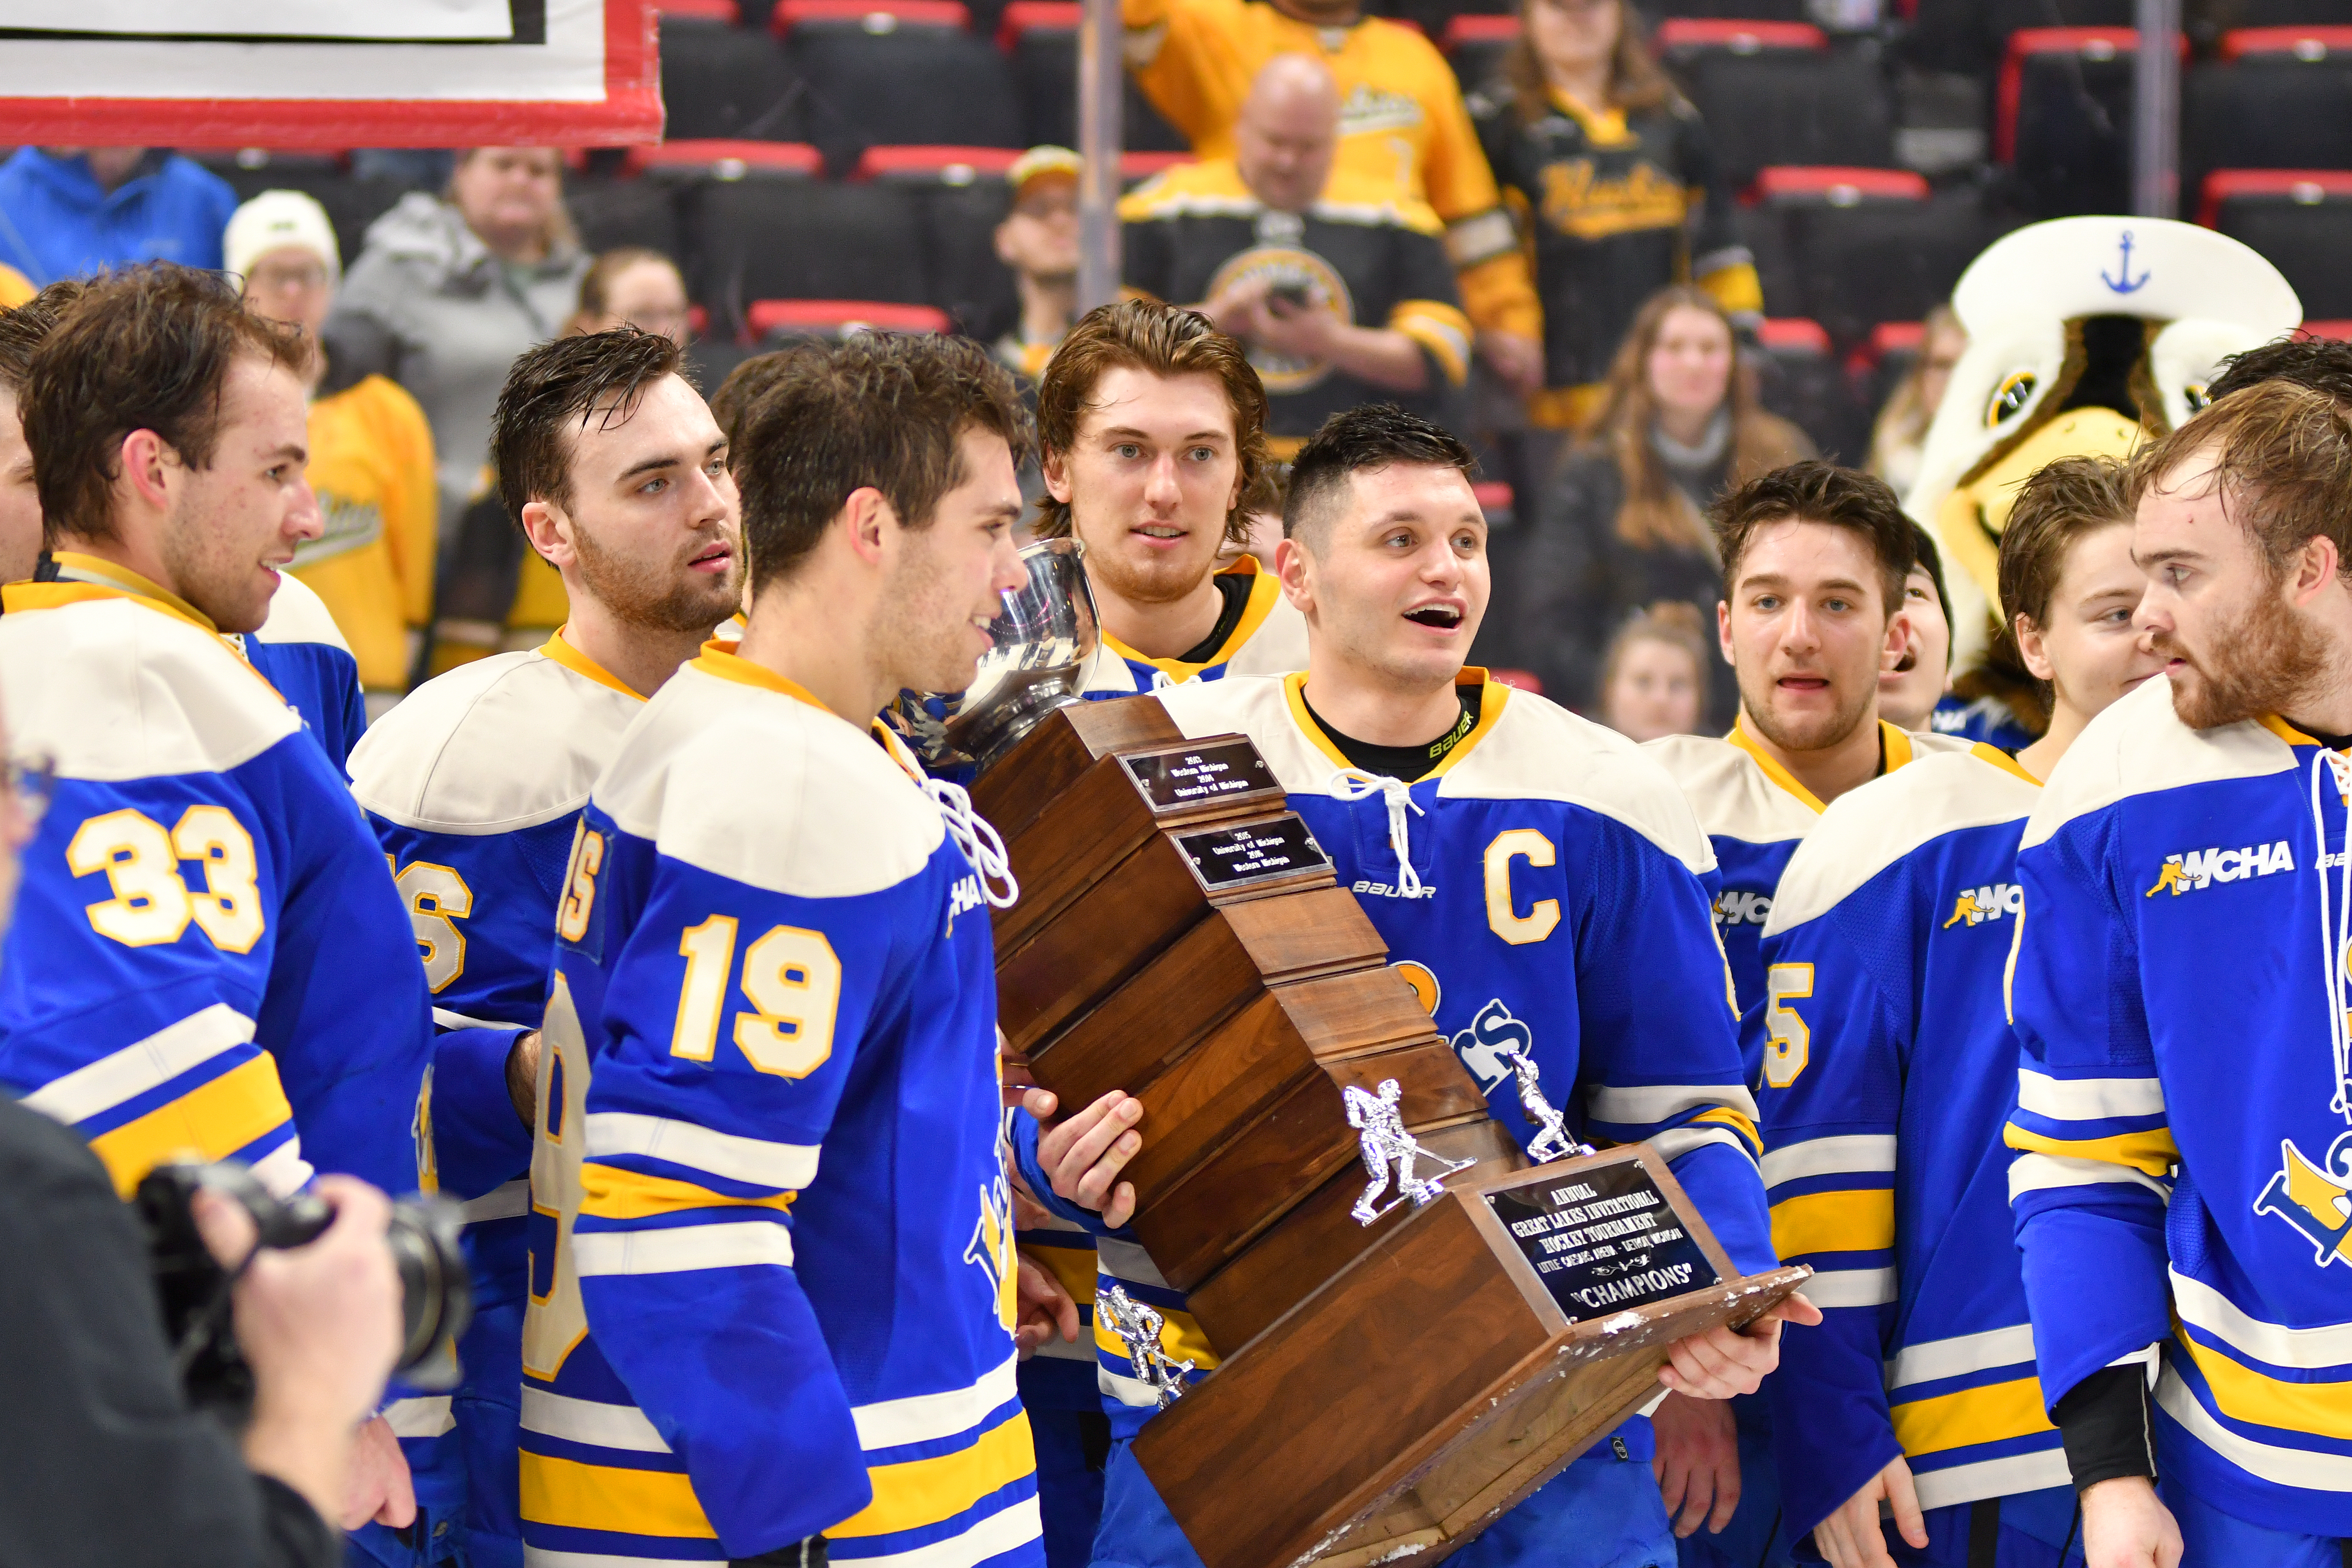 Laker hockey players with GLI trophy